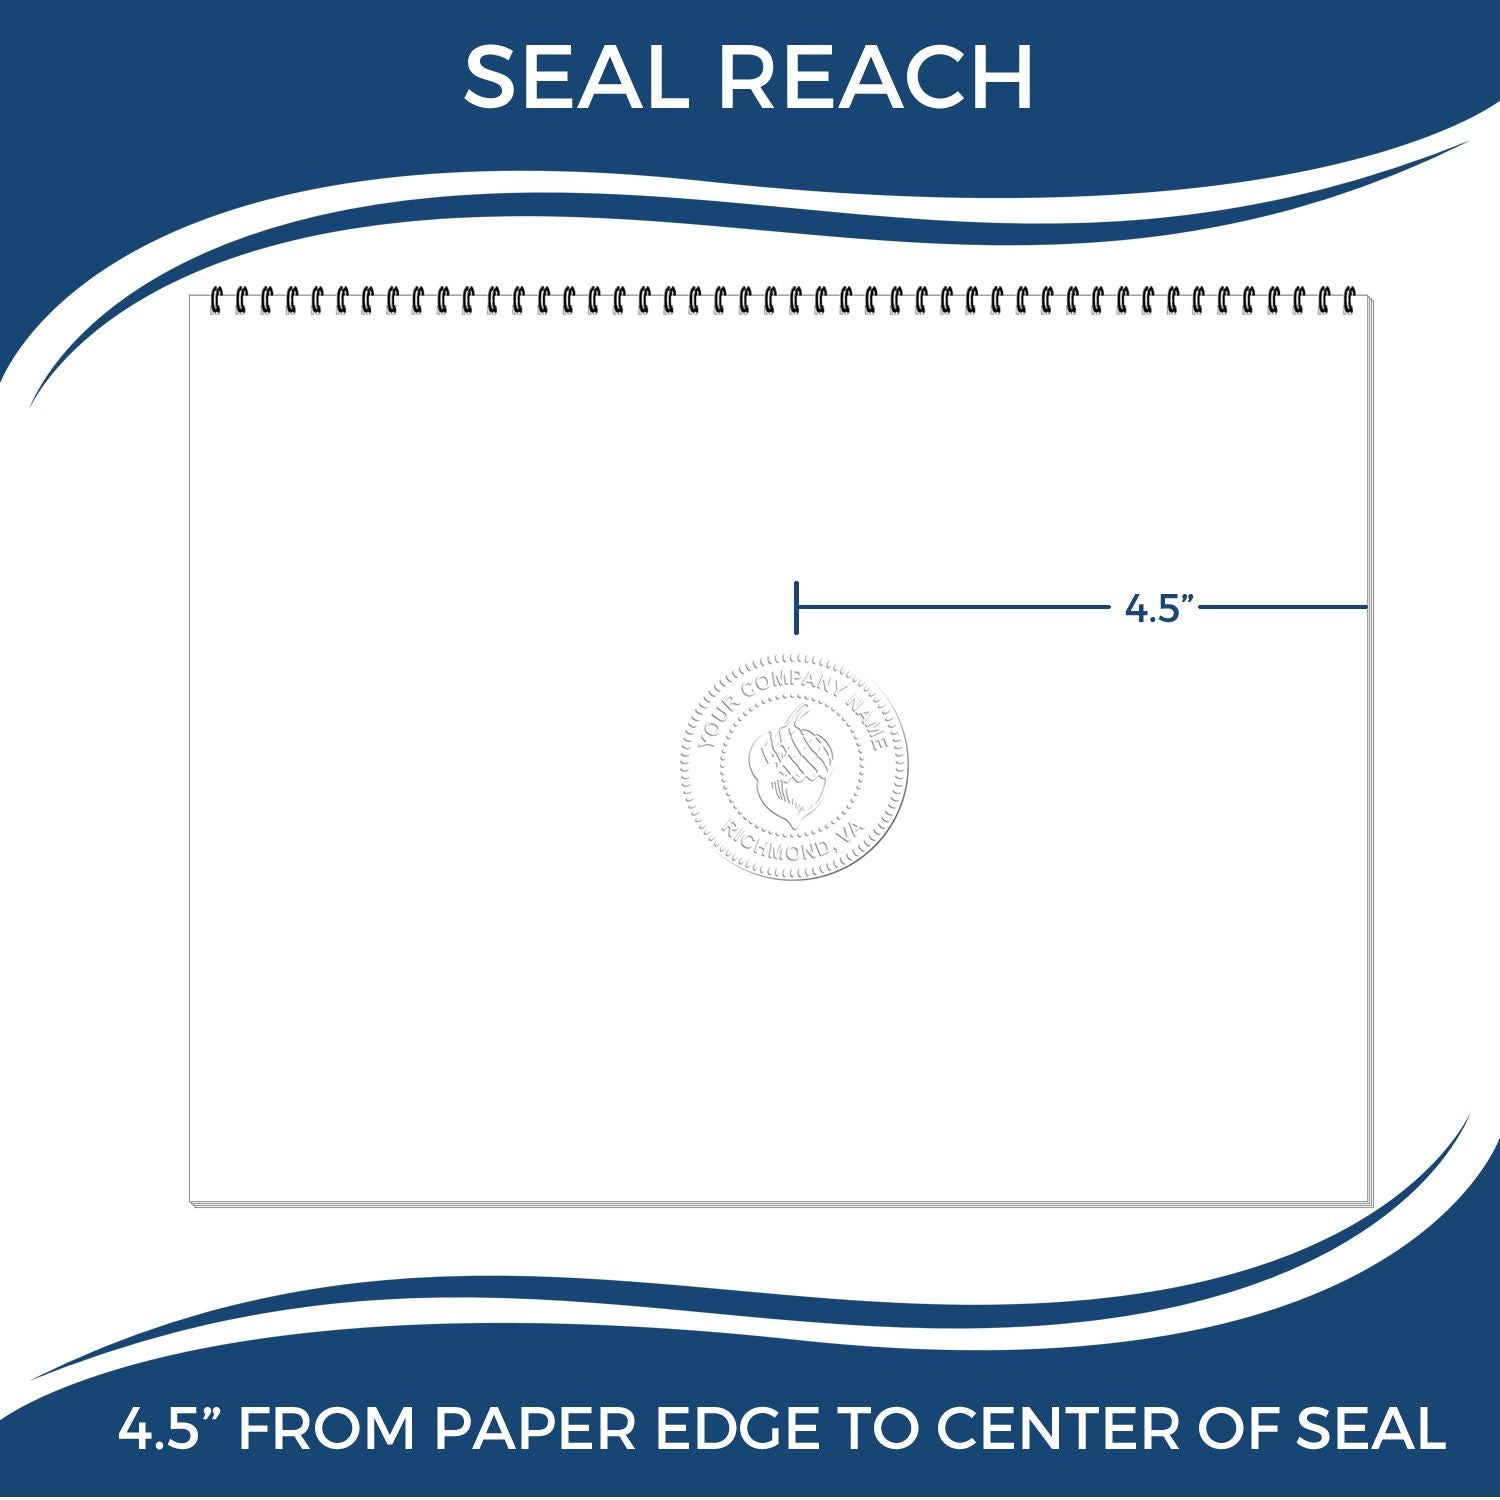 An infographic showing the seal reach which is represented by a ruler and a miniature seal image of the State of Colorado Extended Long Reach Engineer Seal